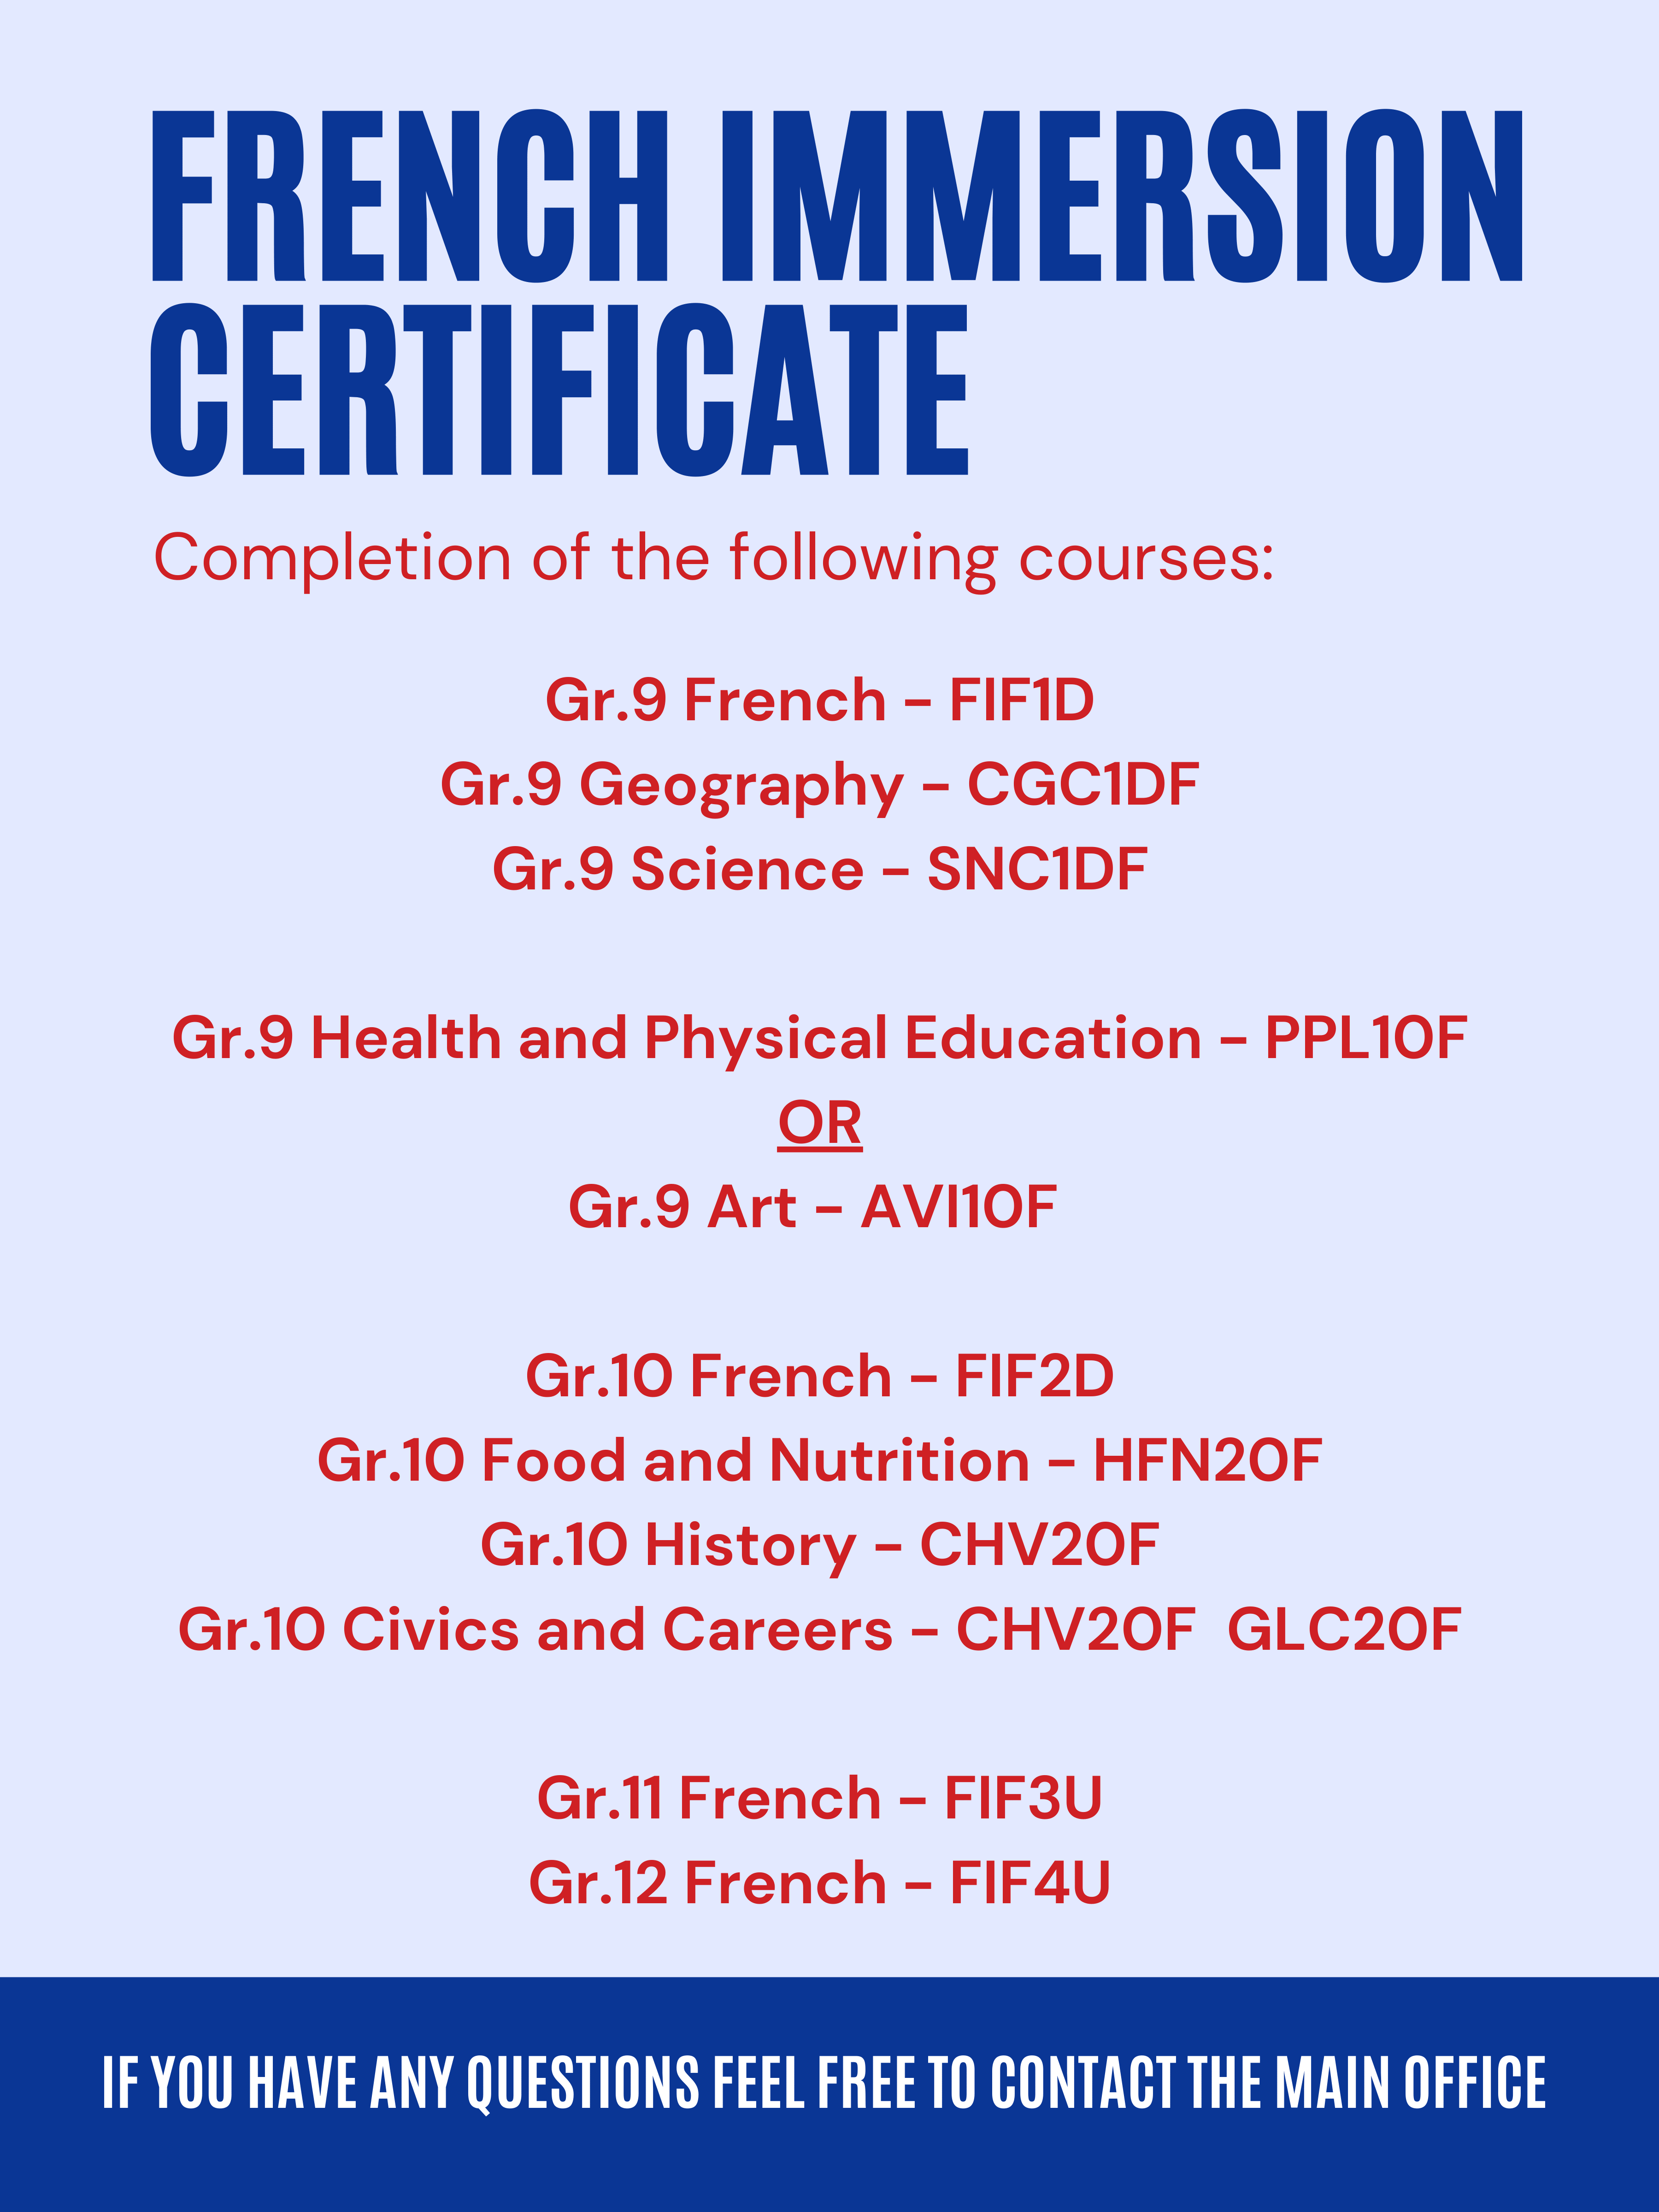 French Immersion certificate-1.png